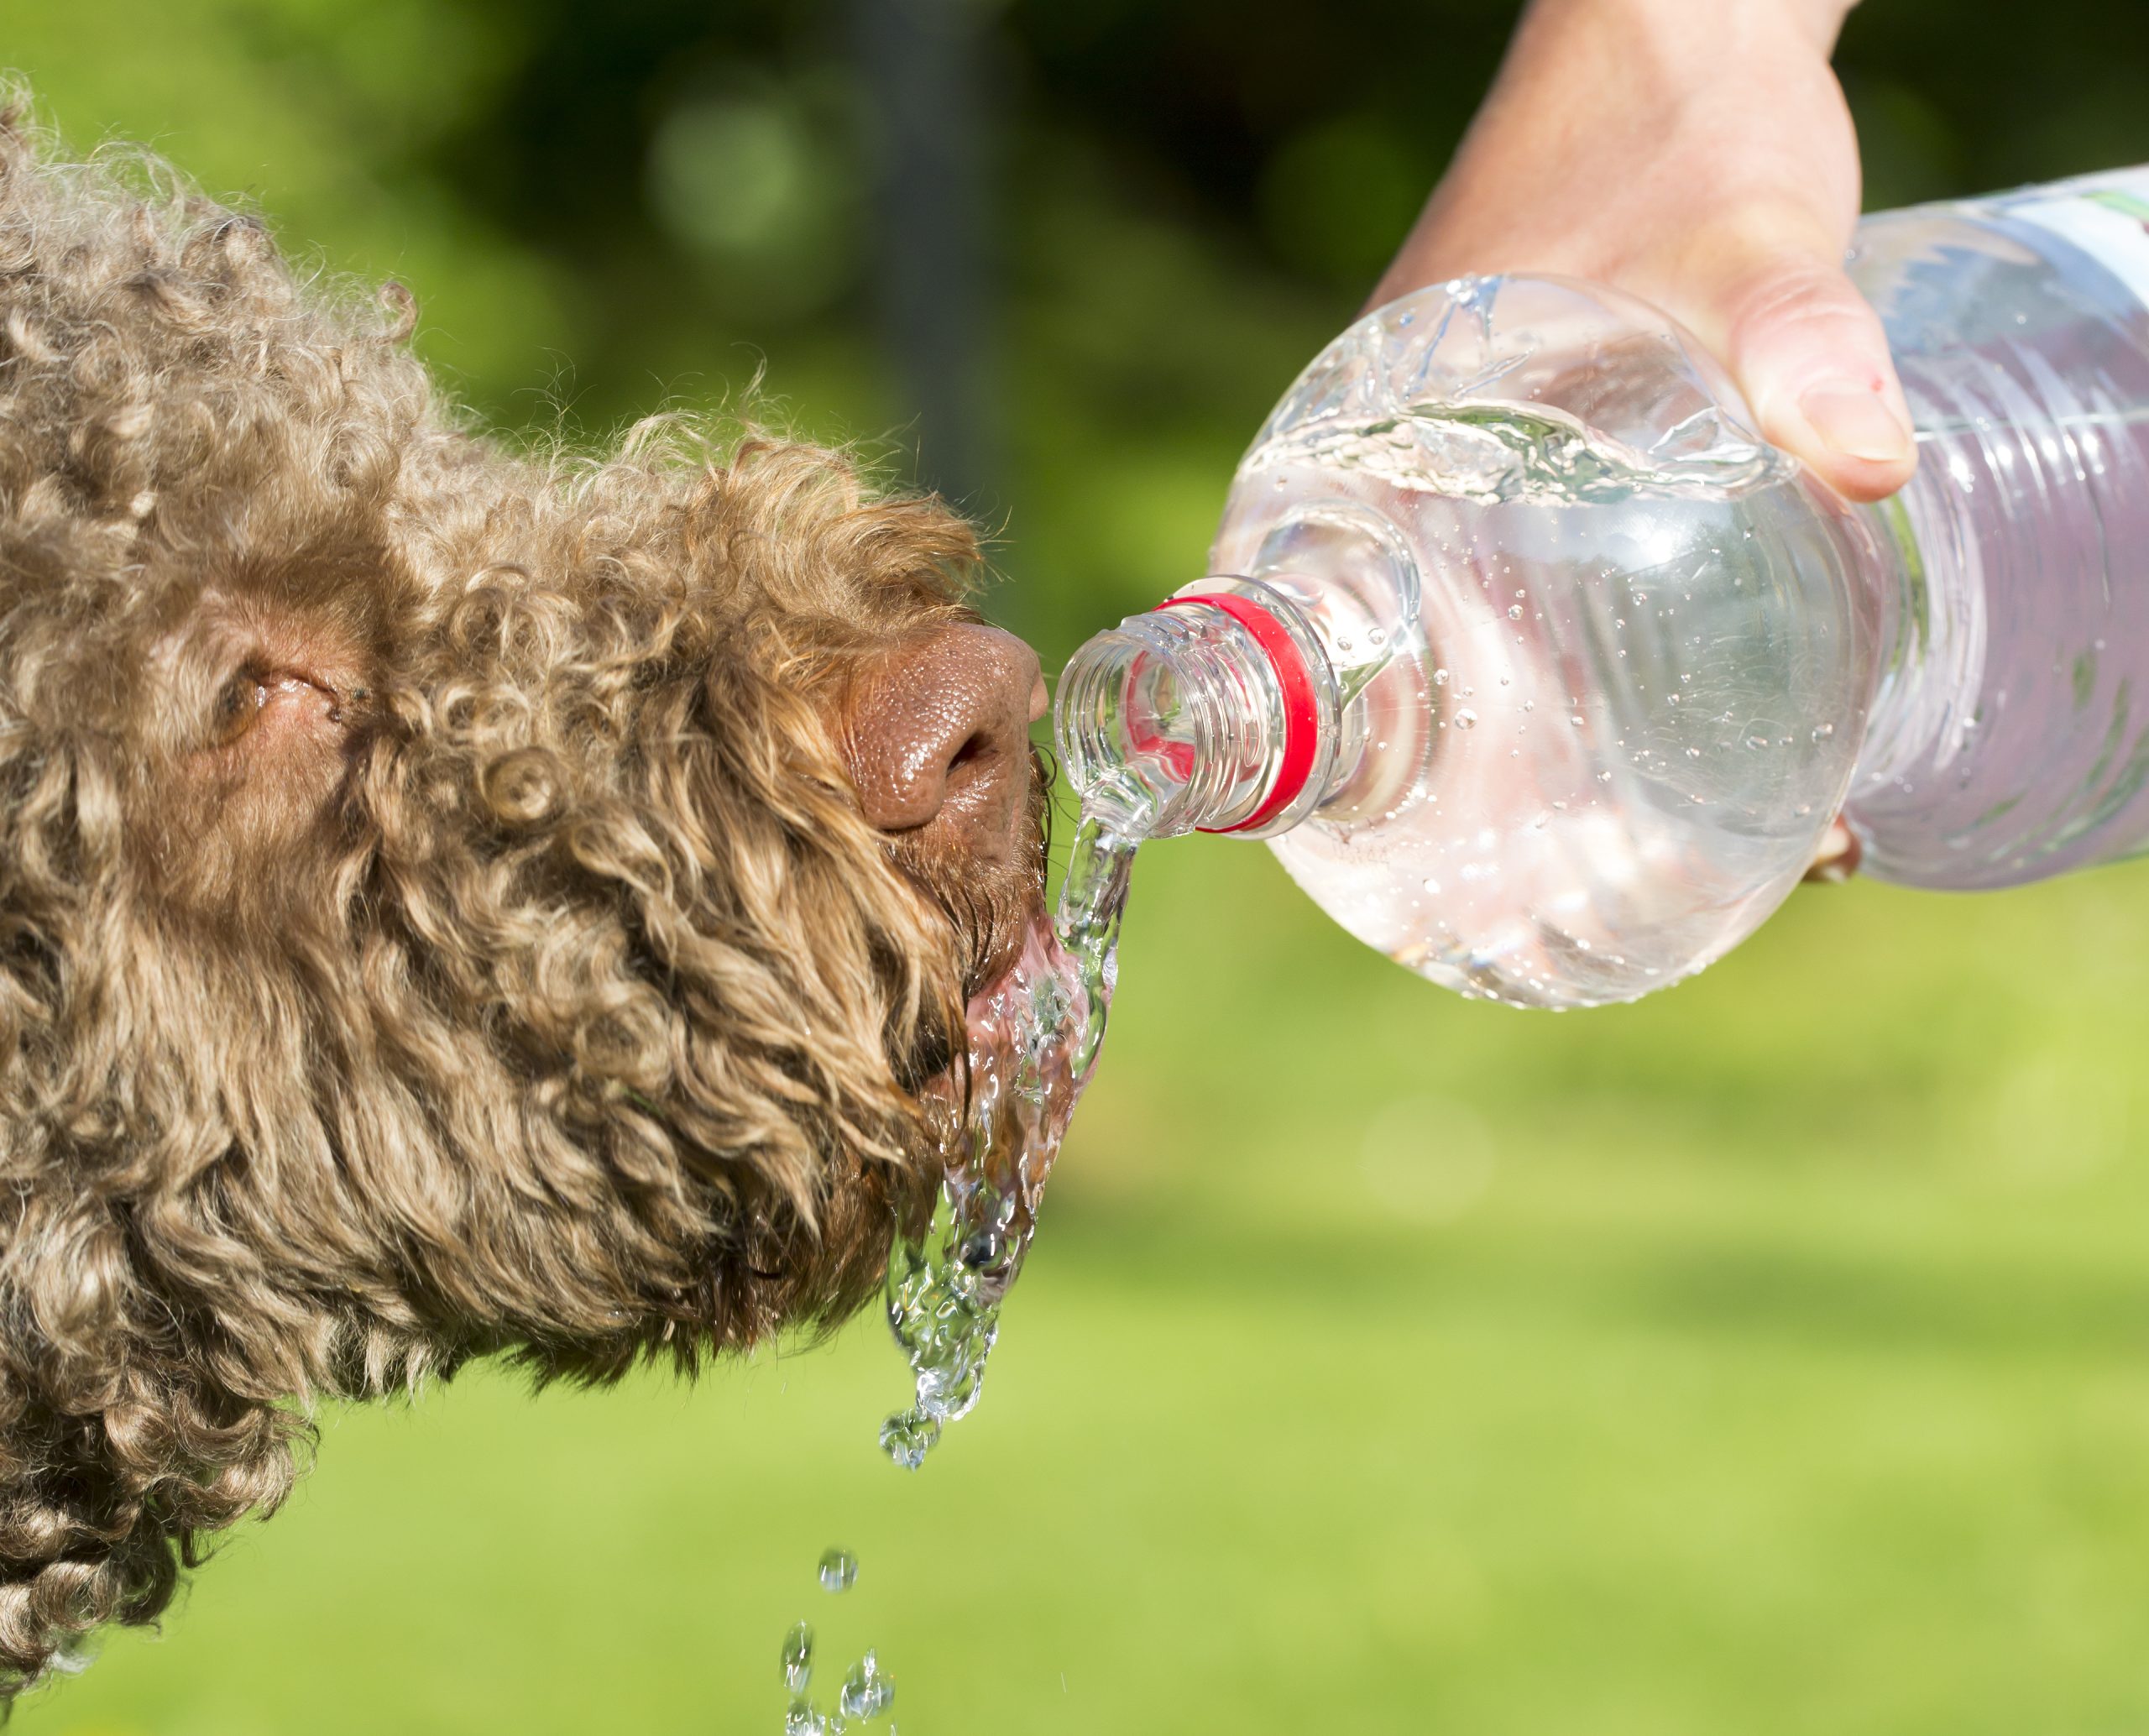 Pet heatstroke cases rising as climate changes